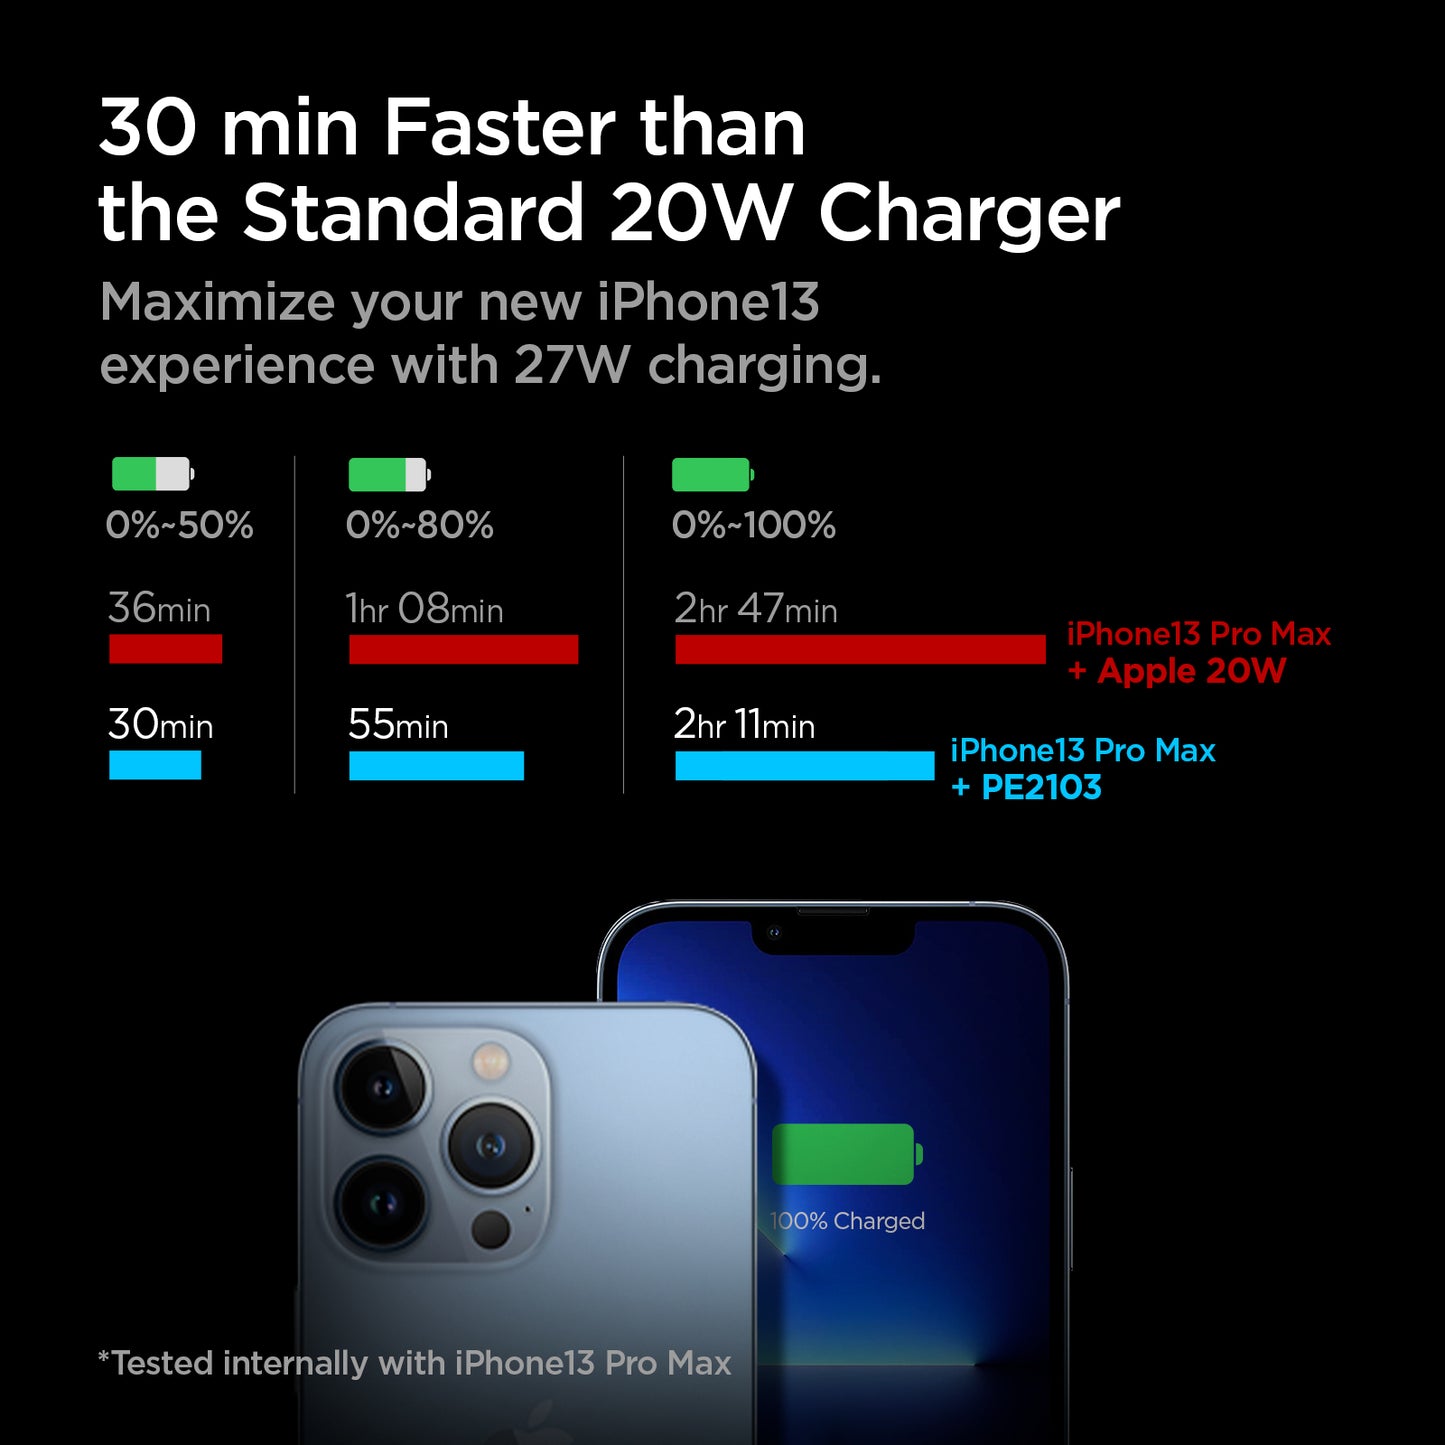 ACH05606 - ArcStation™ Pro 27W Wall Charger PE2103 in Black showing the 30 min Faster than the Standard 20W Charger. Maximizing the new iPhone13 with 27W charging. Comparison of charging percentage between iPhone 13 Pro Max + Apple 20W and iPhone 13 Pro Max + PE2103